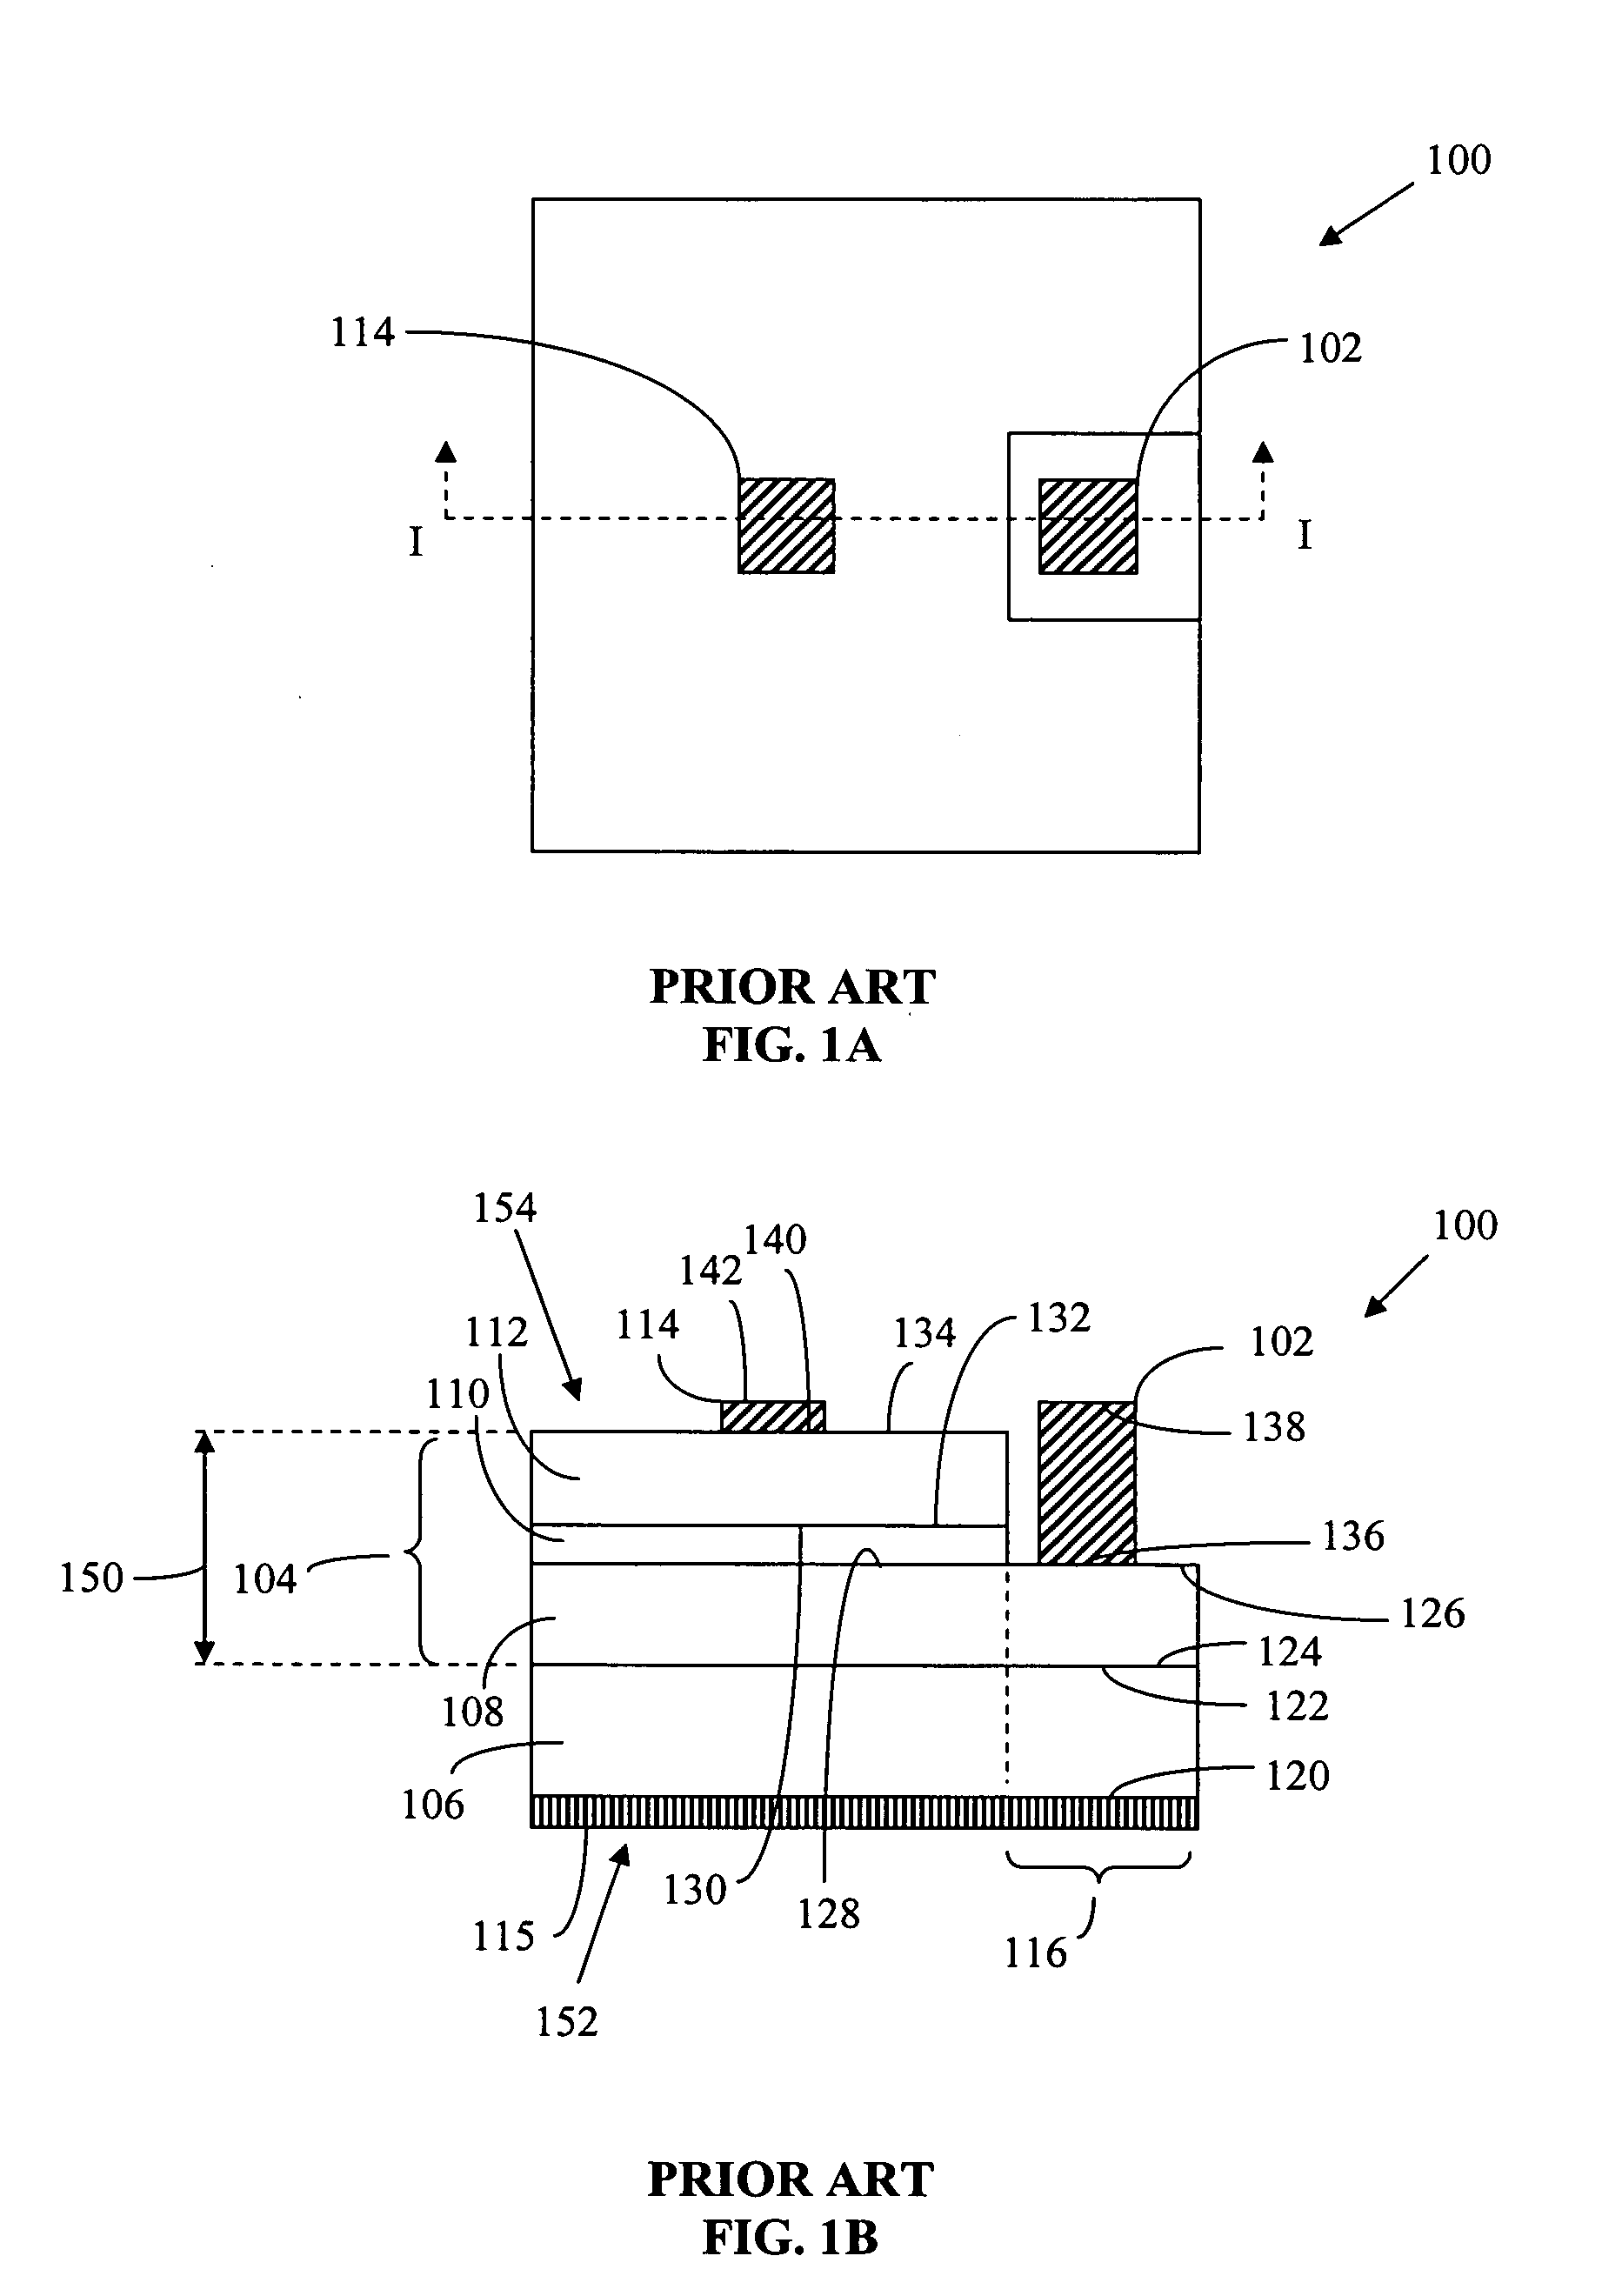 Substrate-free light emitting diode chip